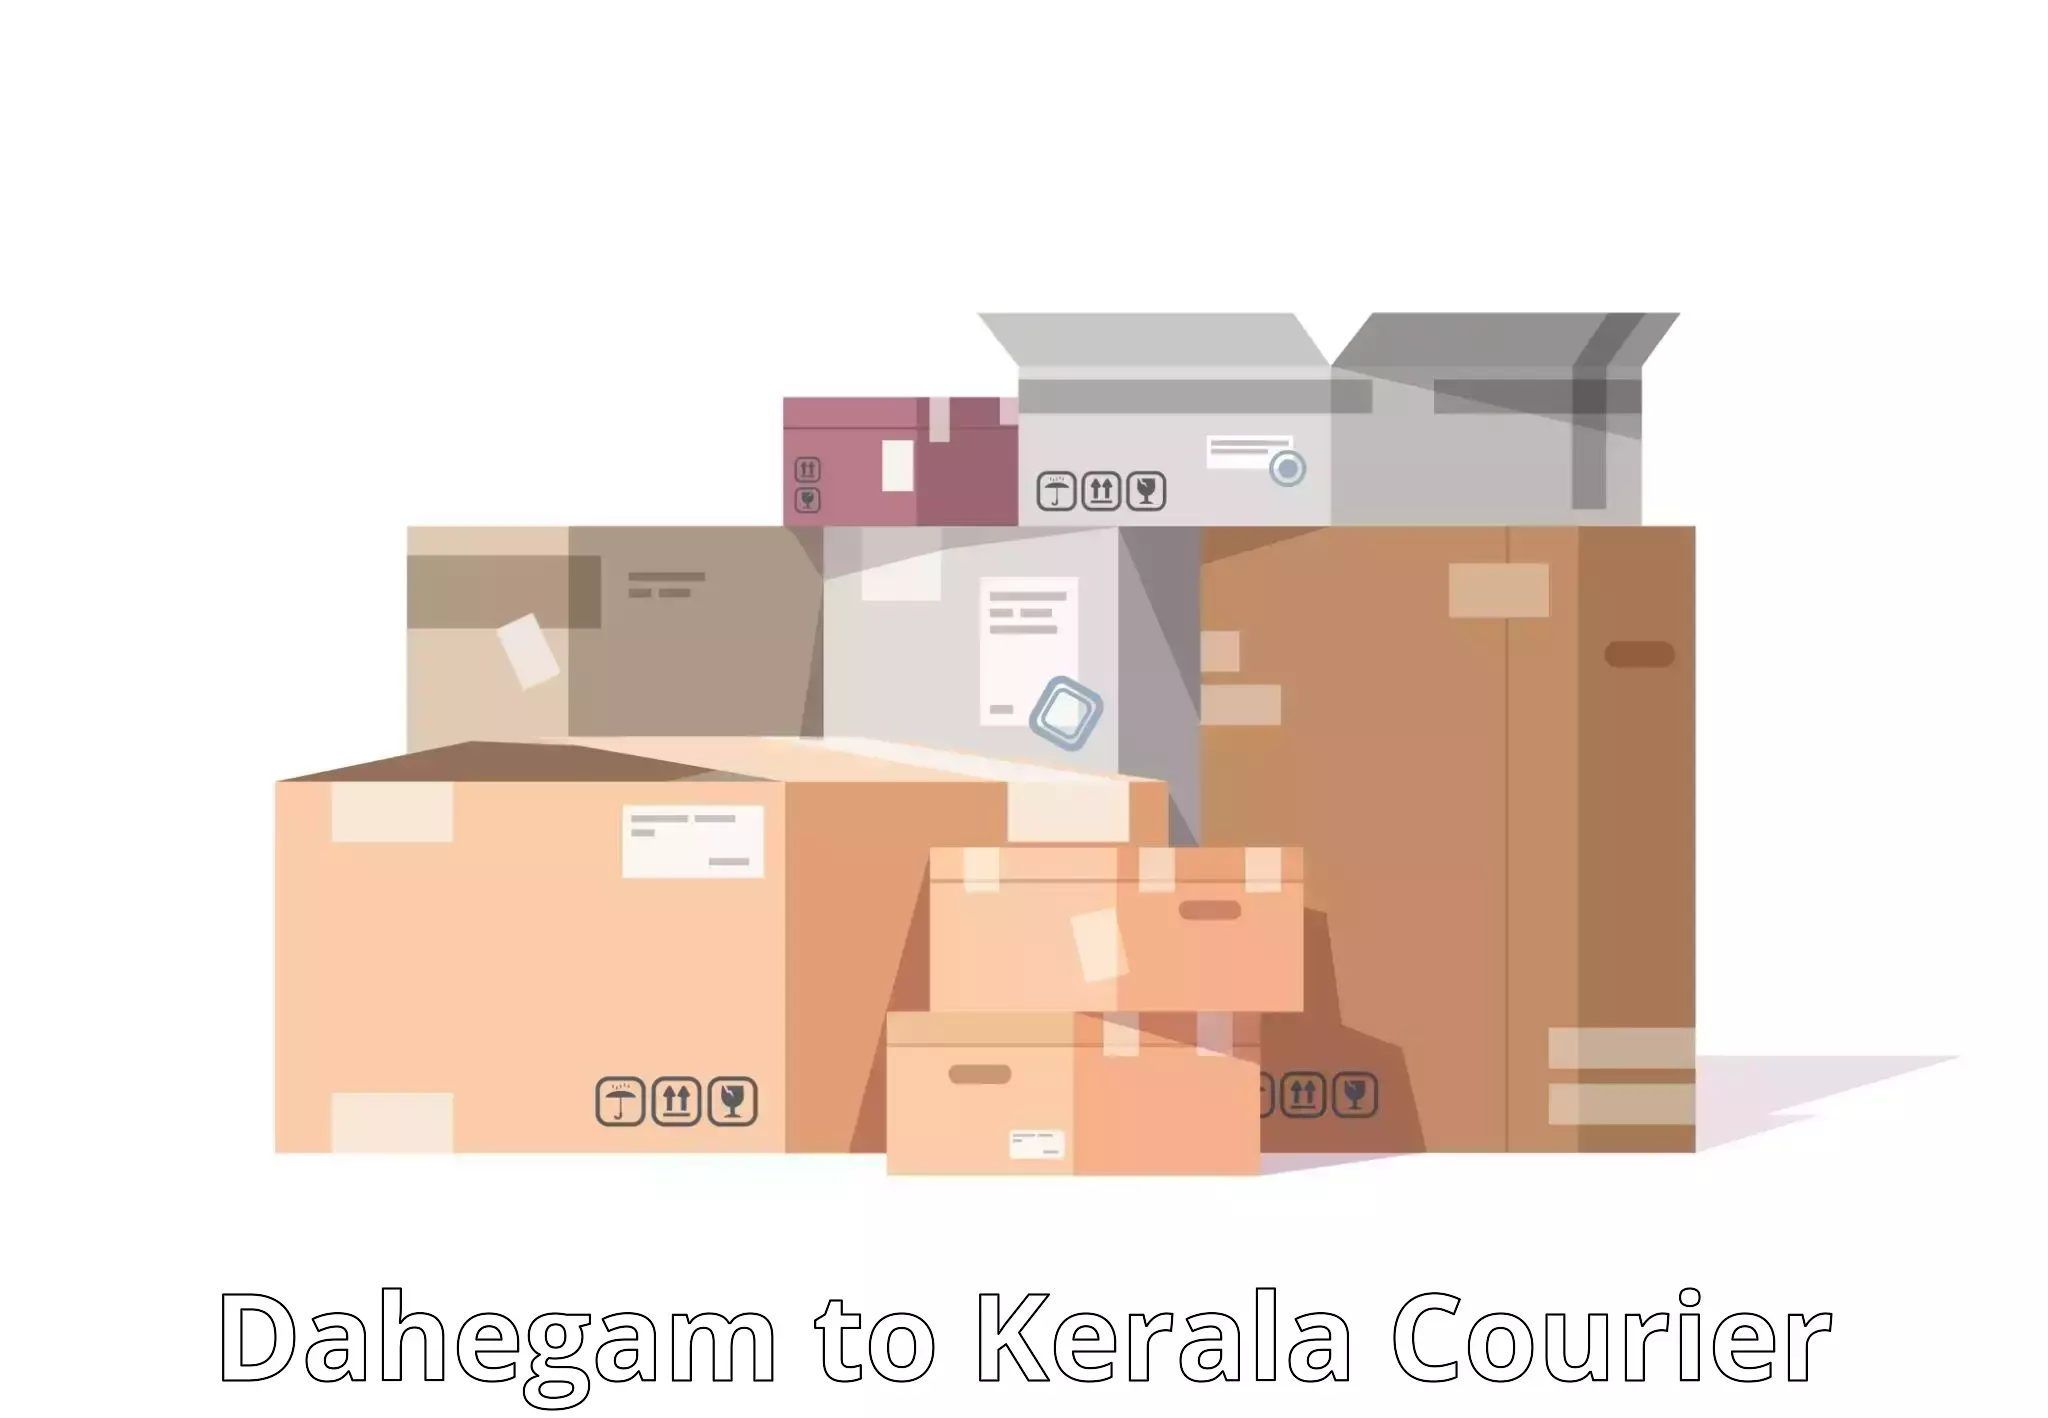 State-of-the-art courier technology Dahegam to Kochi